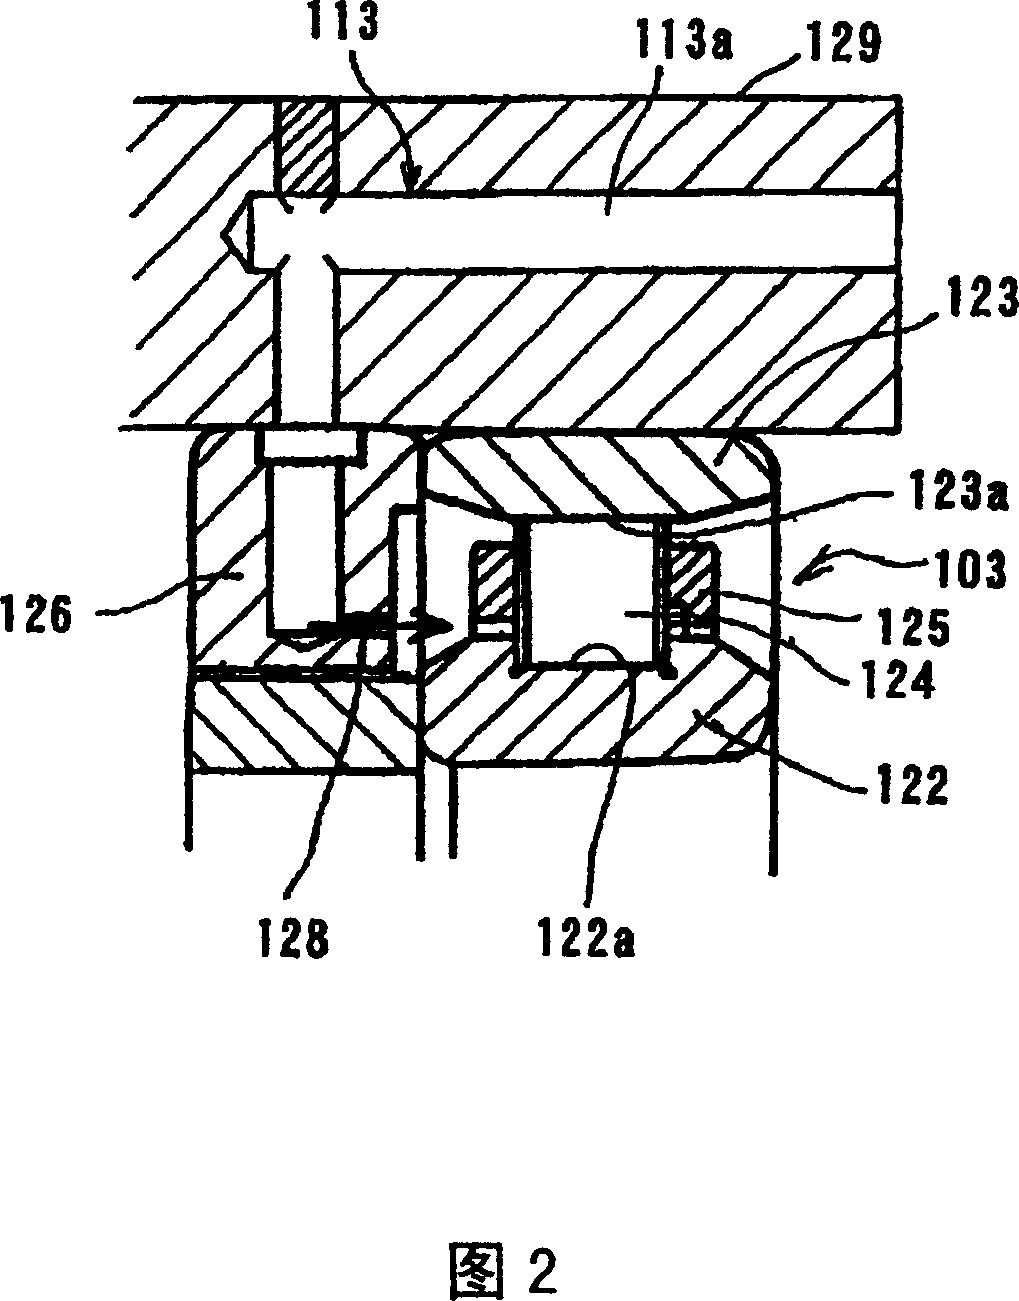 Rolling bearing lubricating method and device